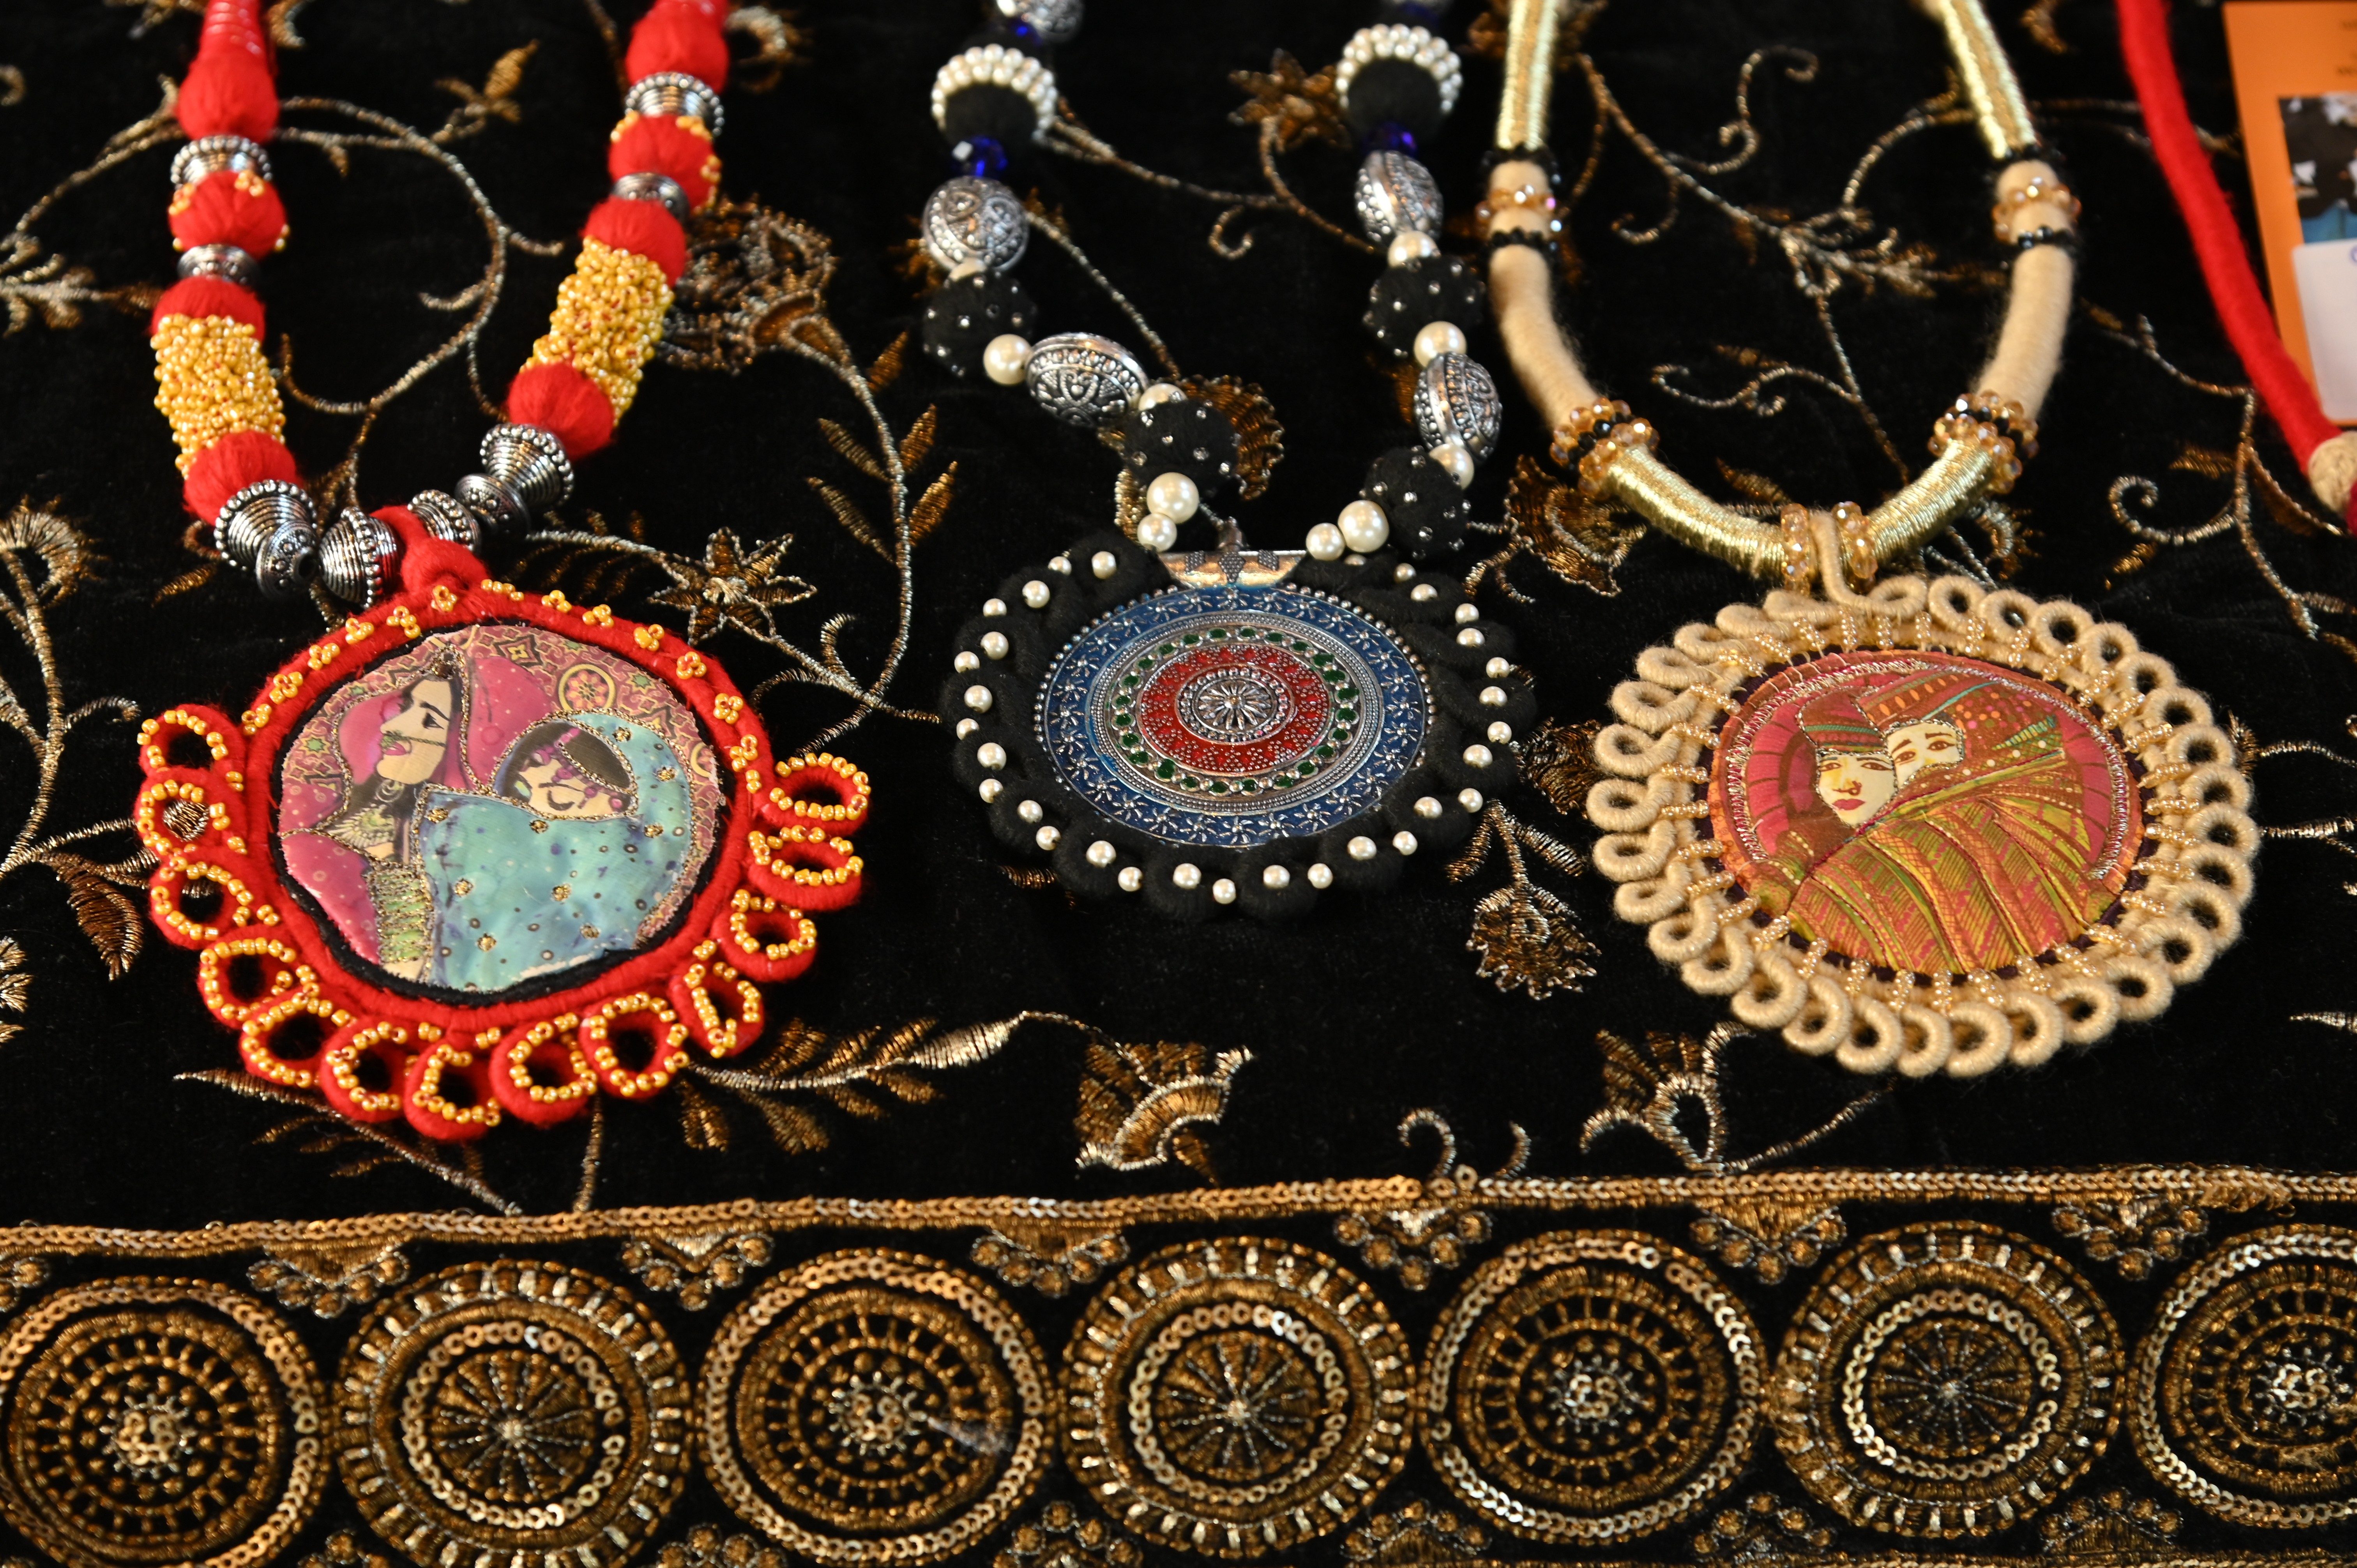 Handmade embroidered necklaces